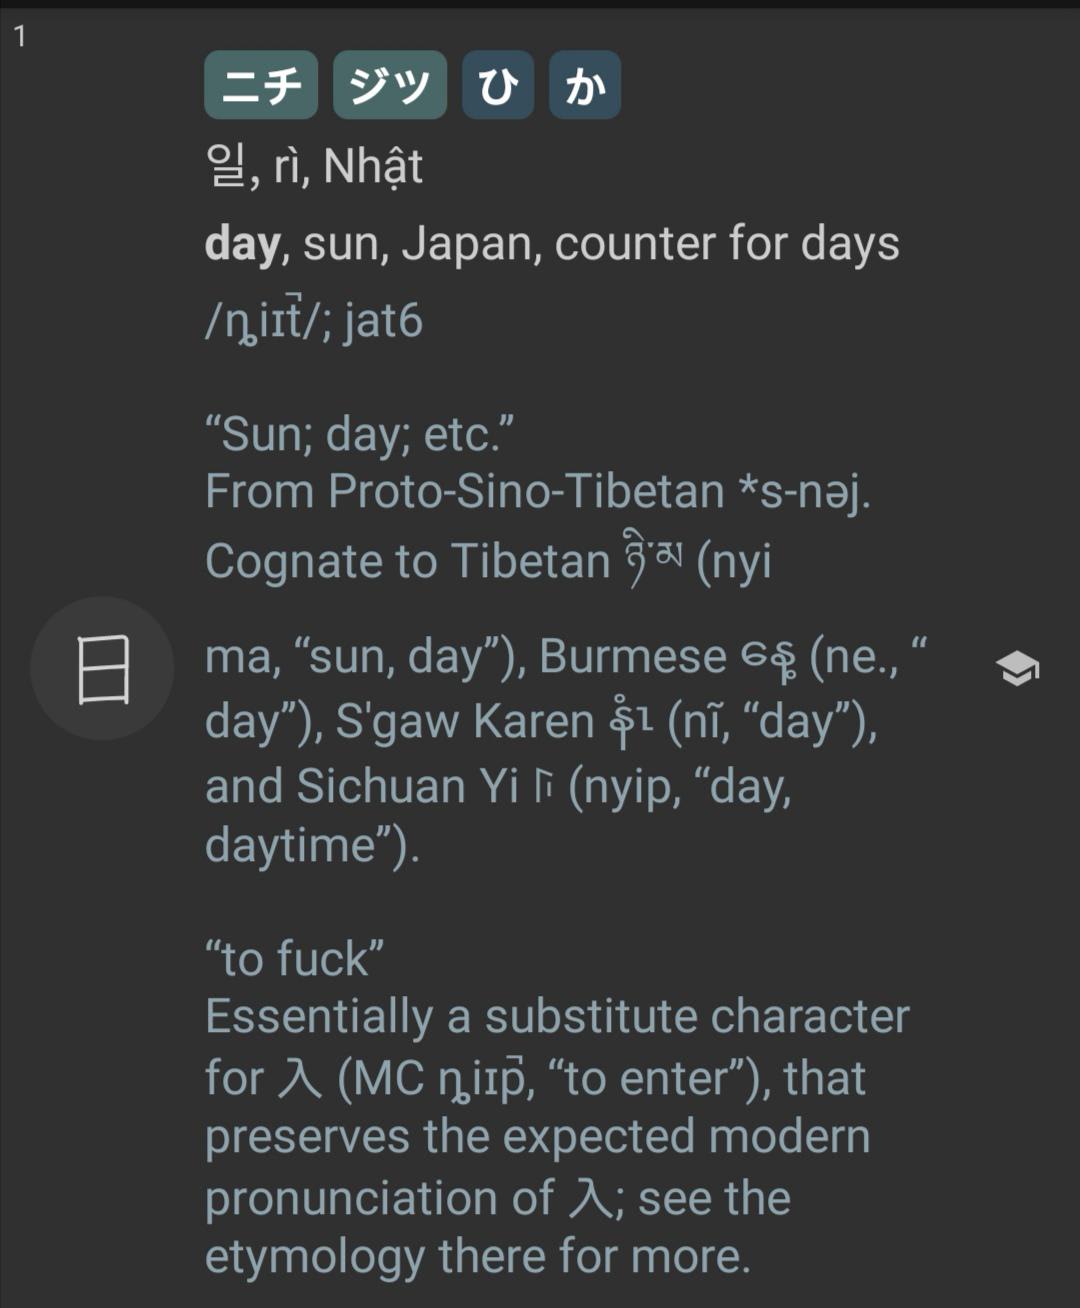 I've tweaked KanjiStudy to show Sino-Xenic readings of characters in Japanese, Korean and Vietnamese, and added their Middle Chinese and Cantonese pronunciations with etymological notes. I find this to be a helpful mnemonic technique to learn readings across different languages.